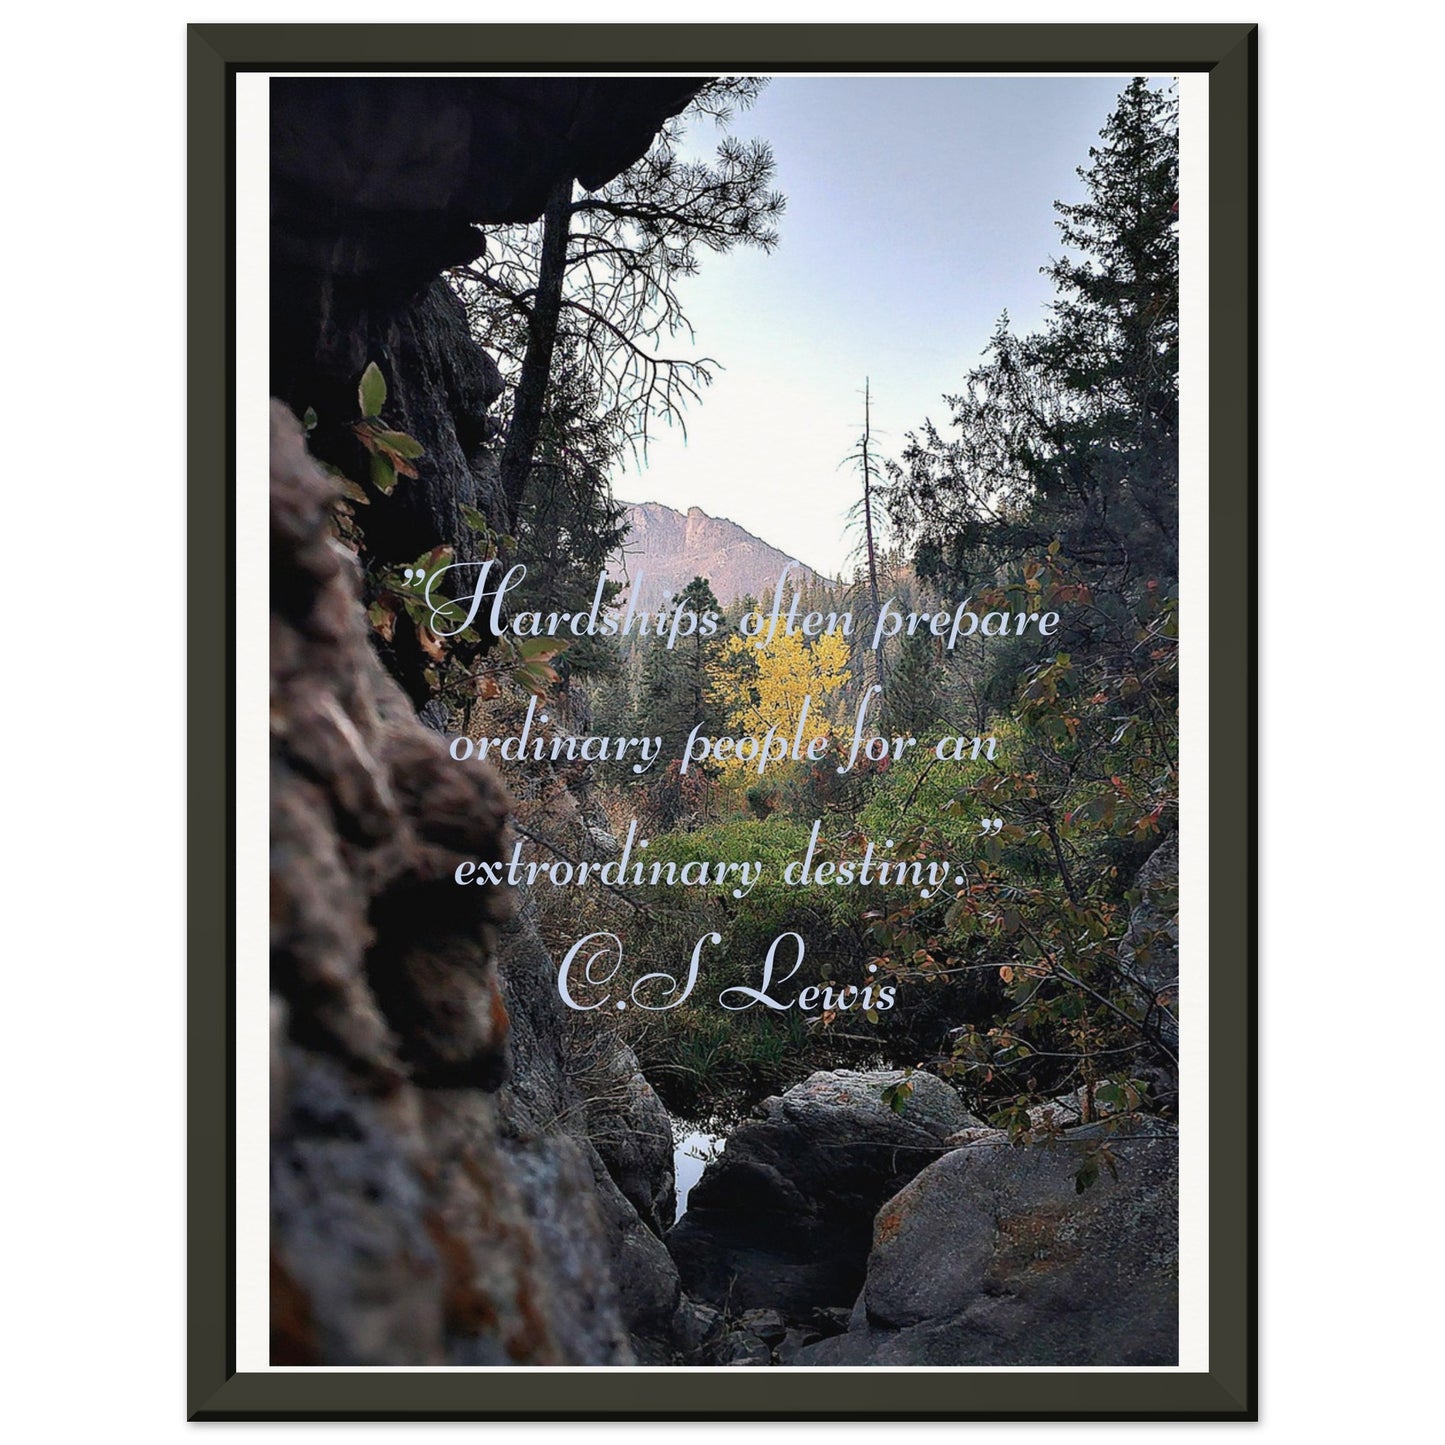 C.S Lweis quote wall art